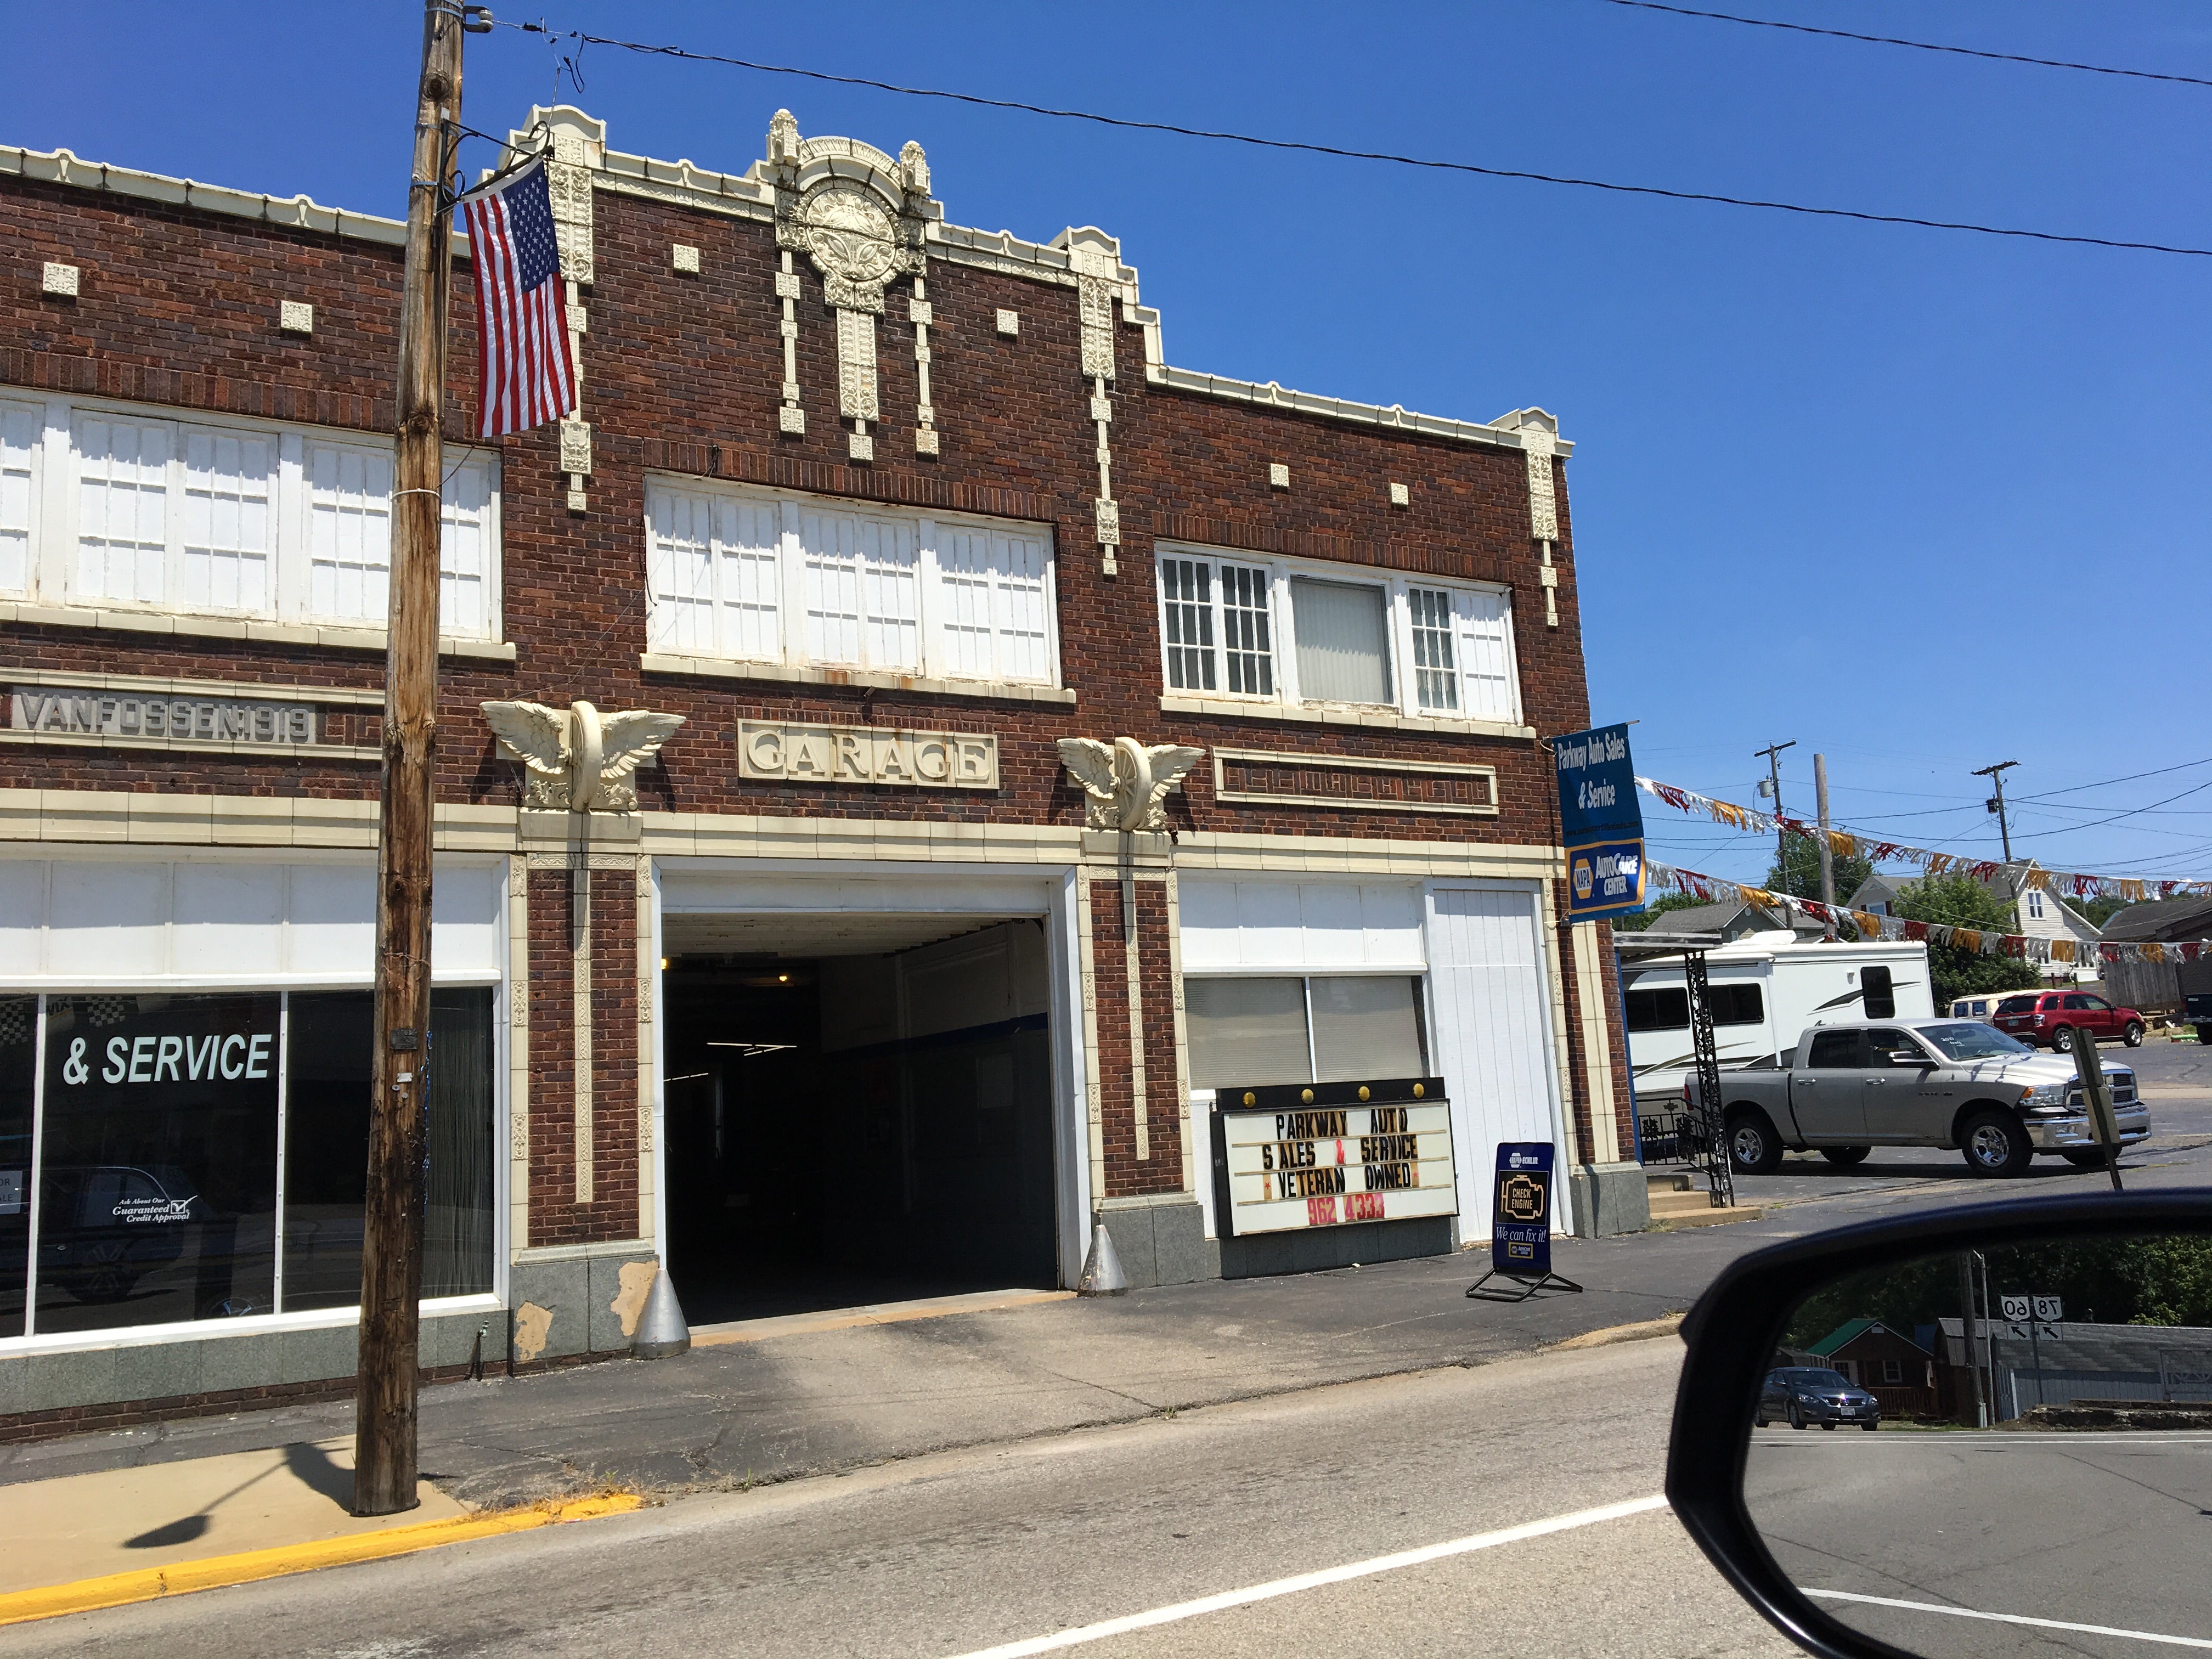 Very interesting architecture on the old buildings in McConnellsville, Oh plus statues to see